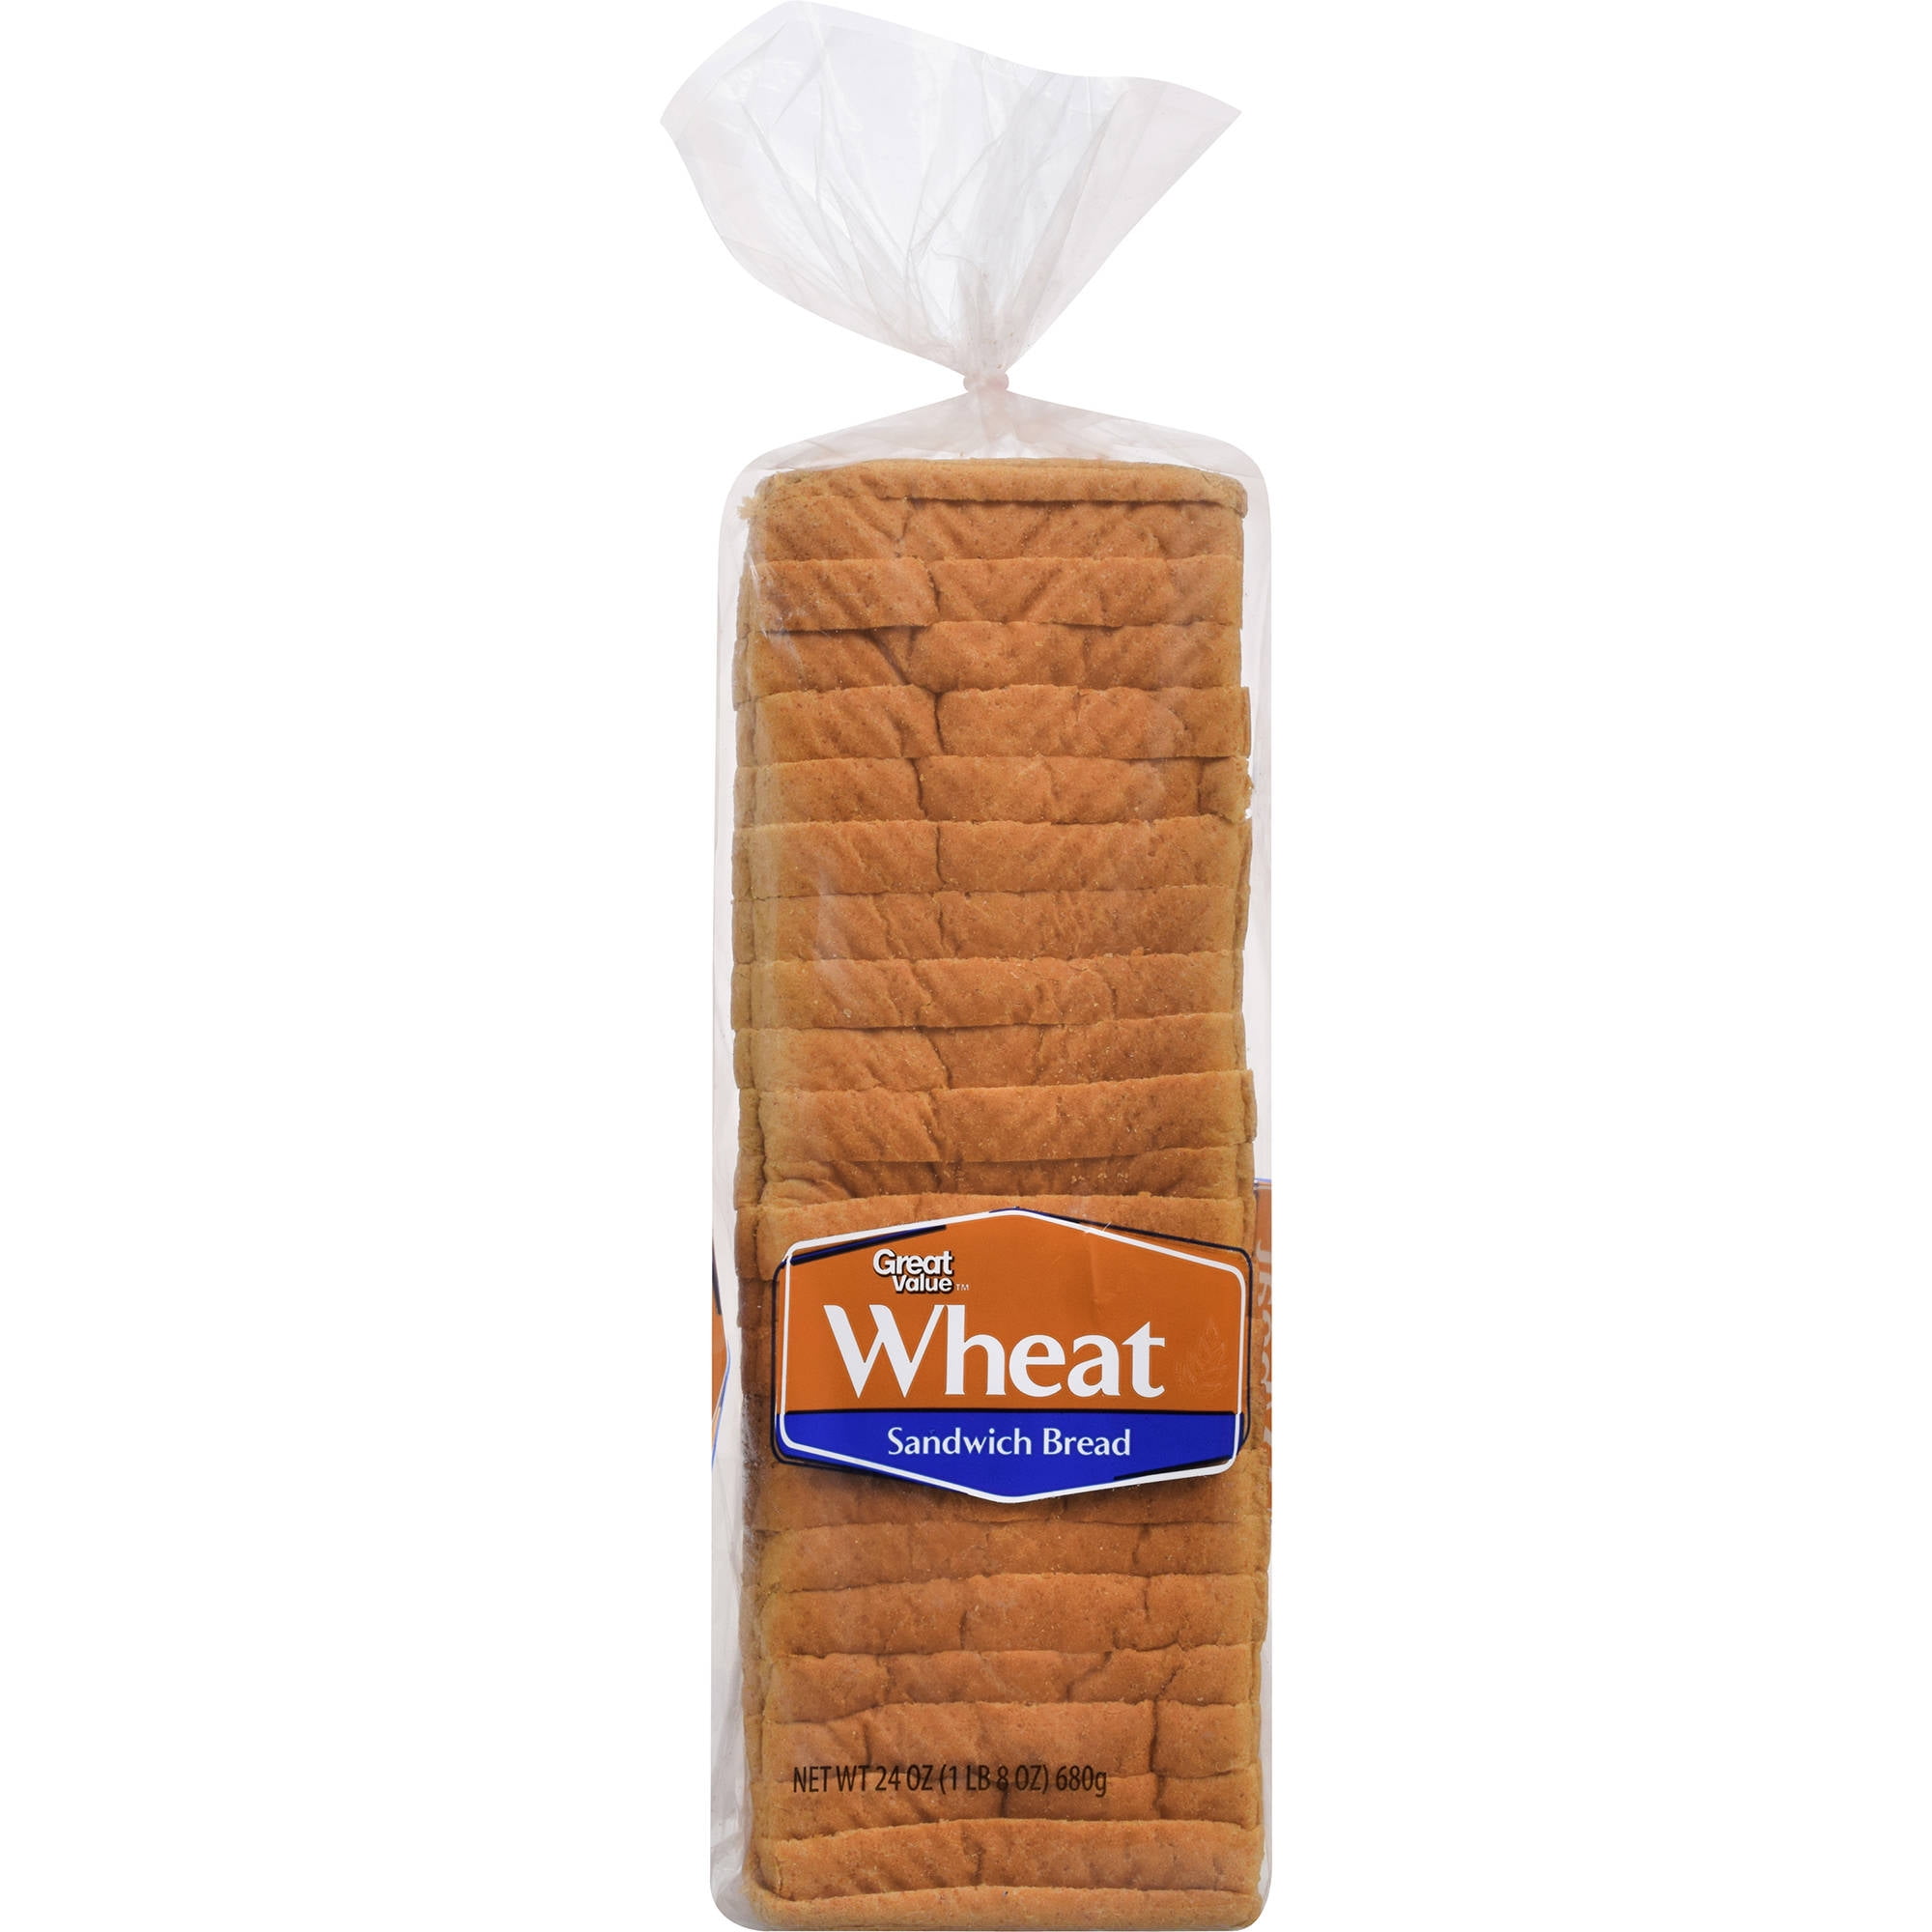 wic approved bread brands